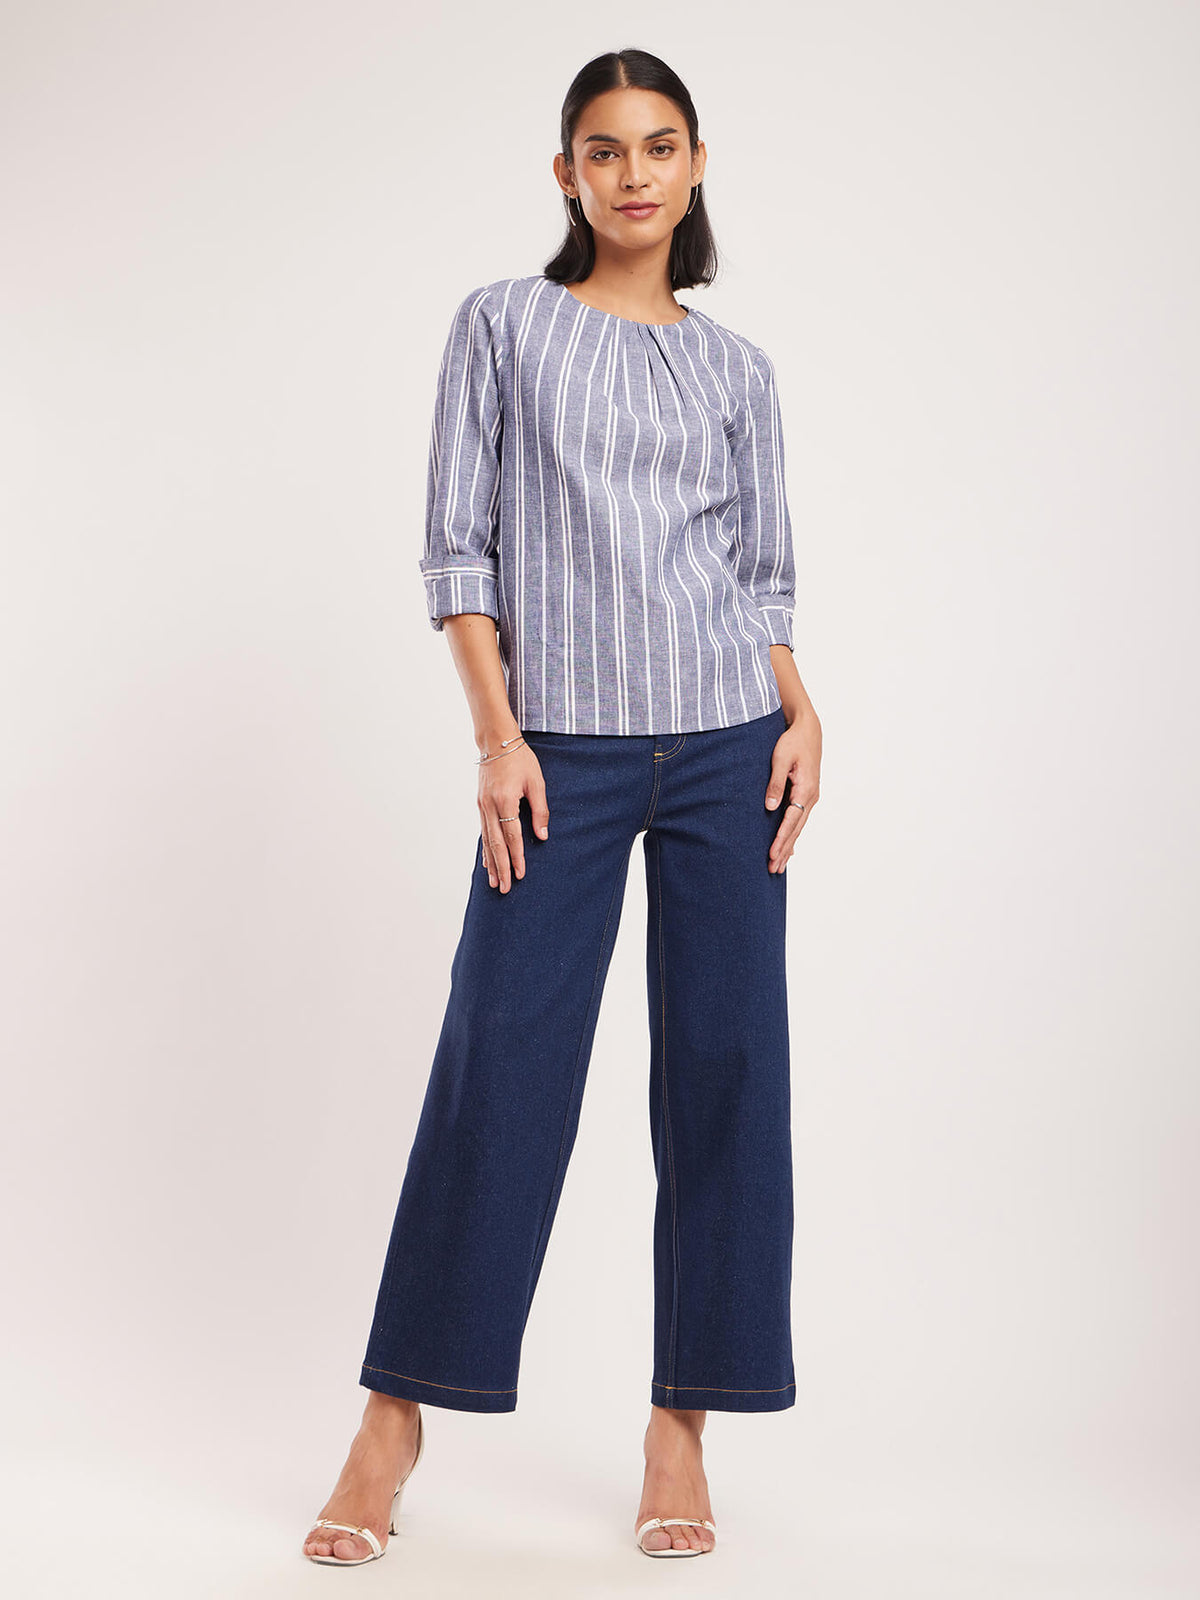 Cotton Vertical Stripes Top - Blue And White